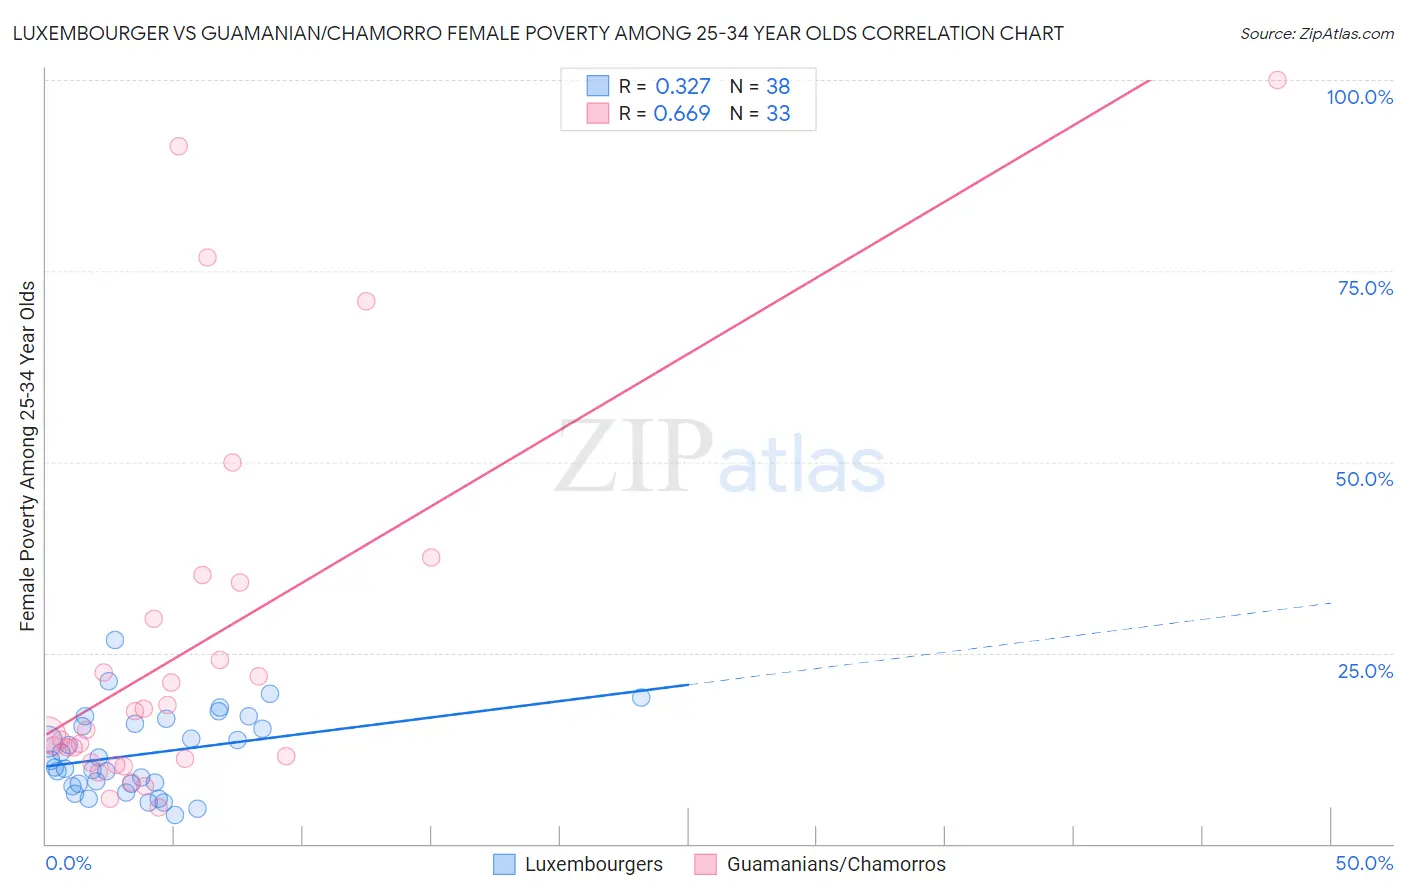 Luxembourger vs Guamanian/Chamorro Female Poverty Among 25-34 Year Olds